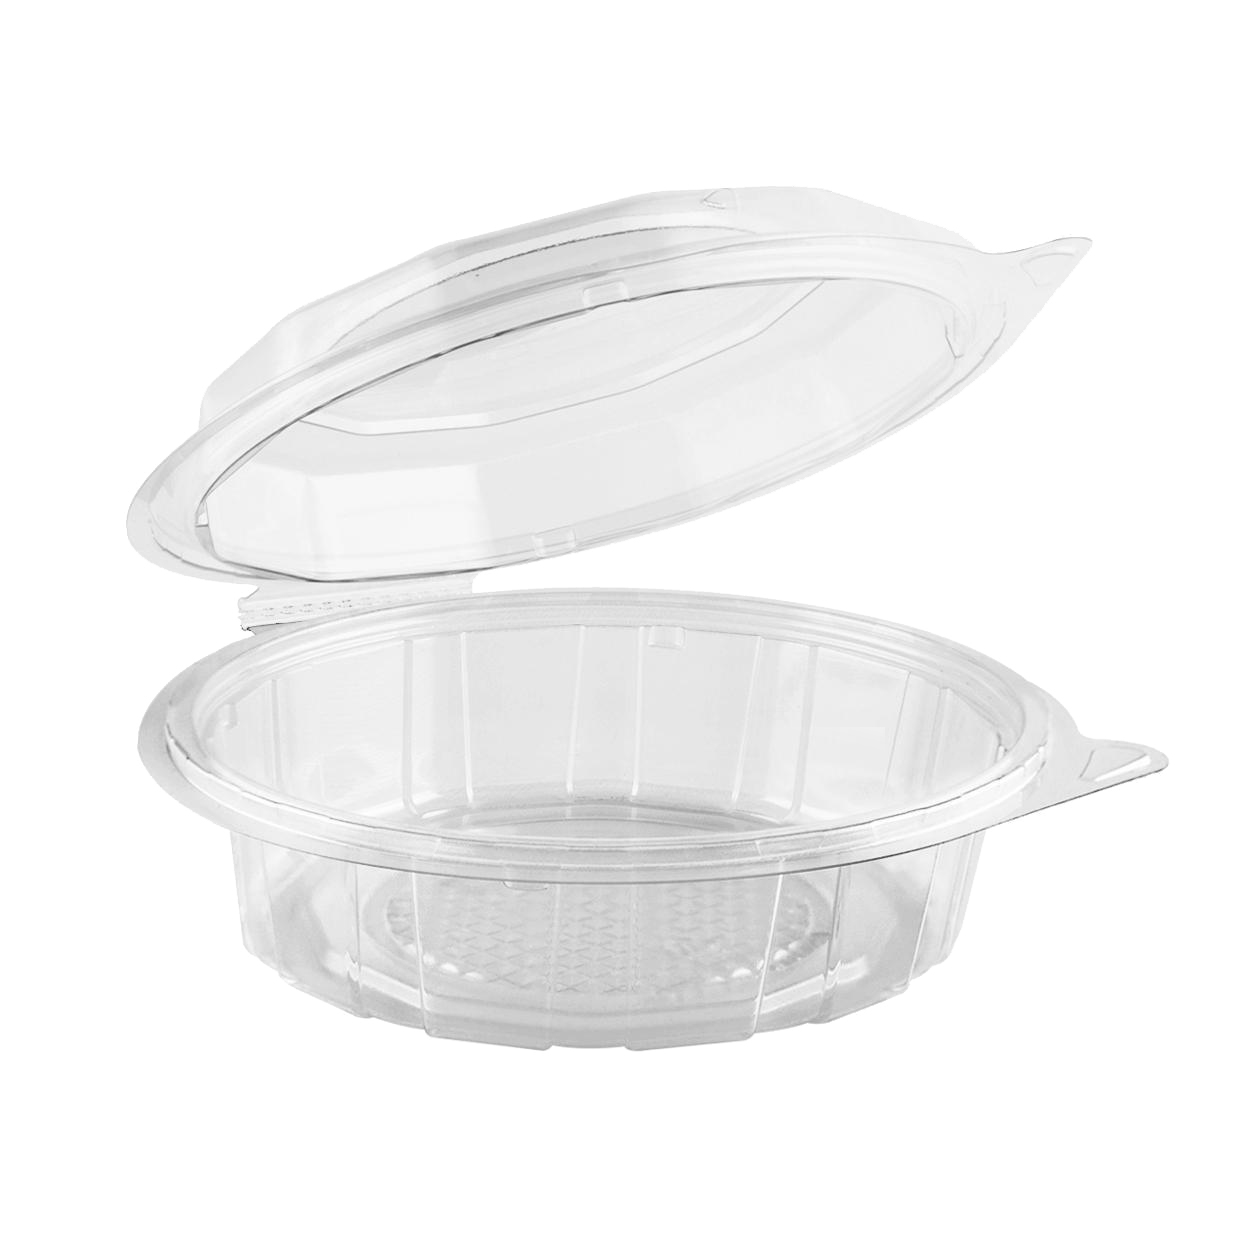 Food Service Trays, The Classic, SuperMax